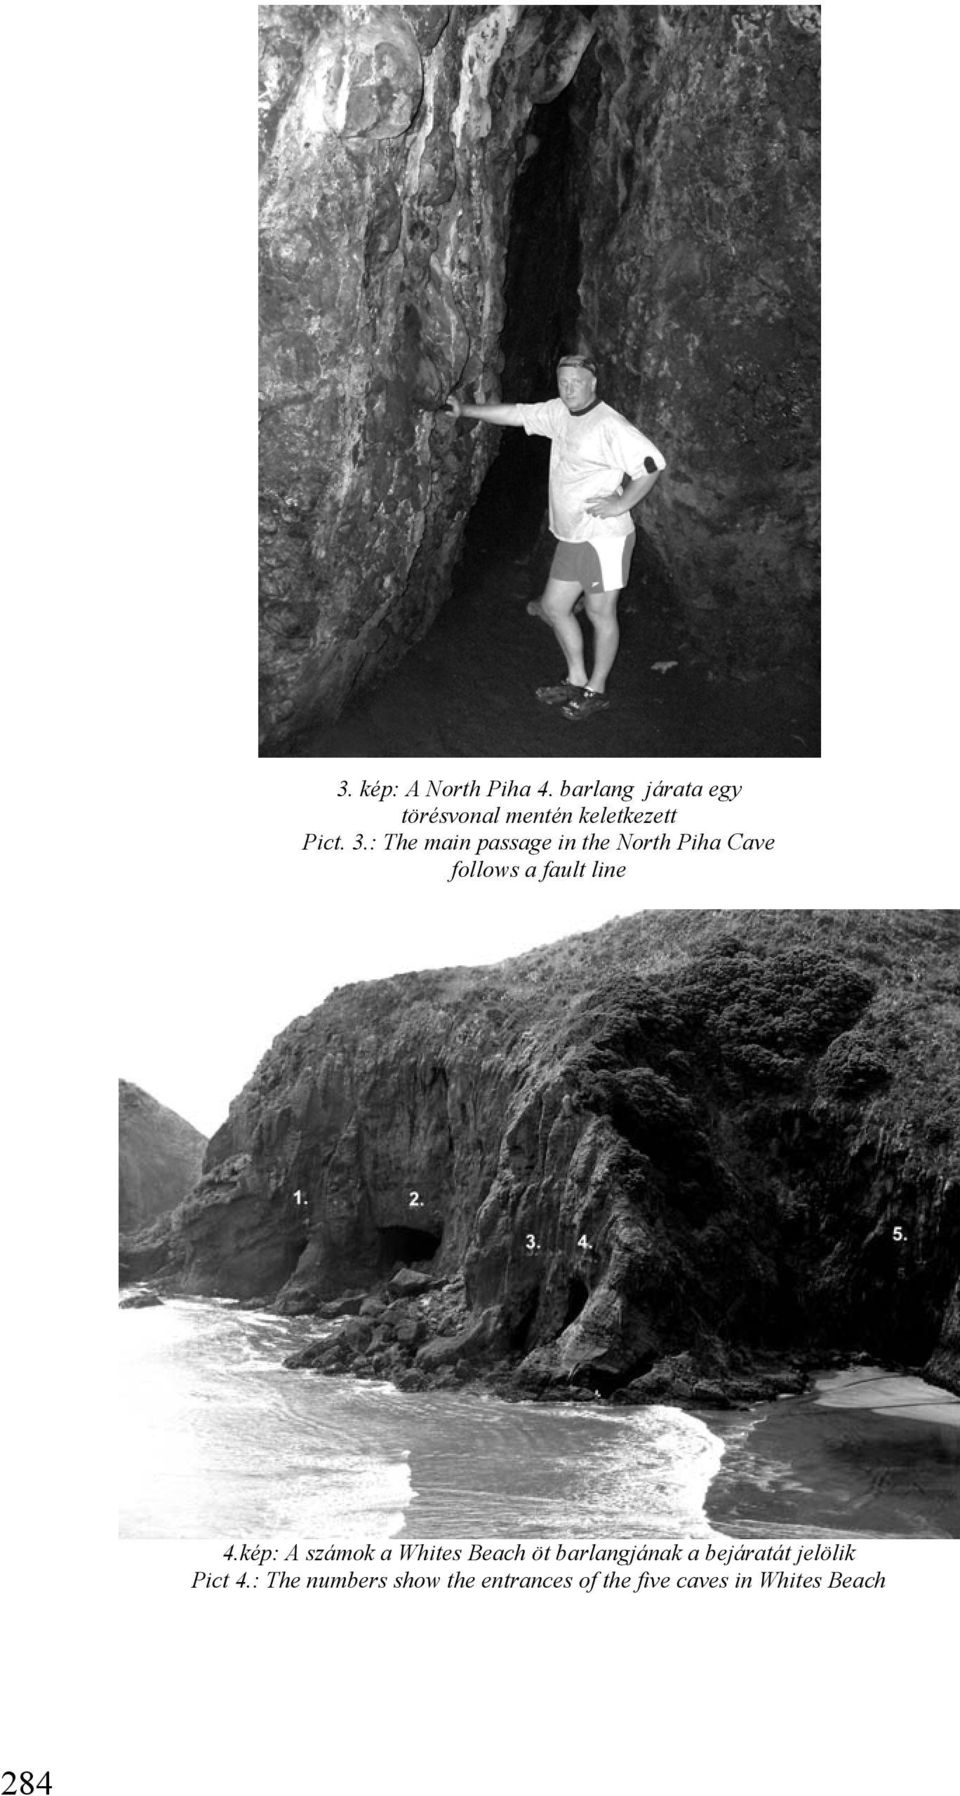 : The main passage in the North Piha Cave follows a fault line 4.